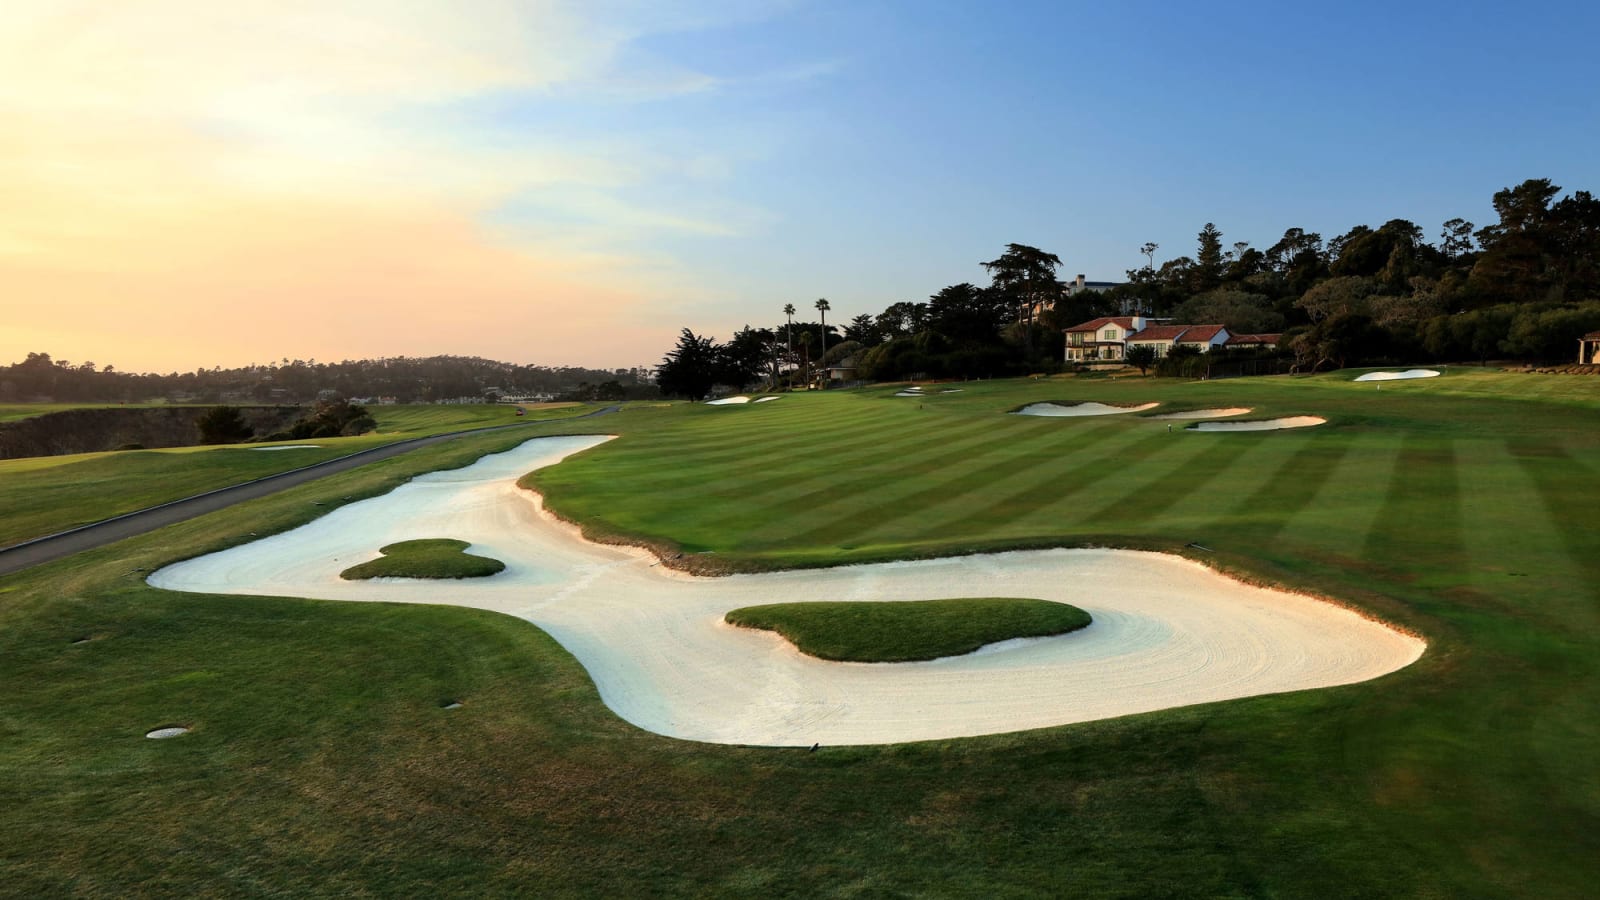 Ranking the 18 holes of Pebble Beach for the U.S. Open